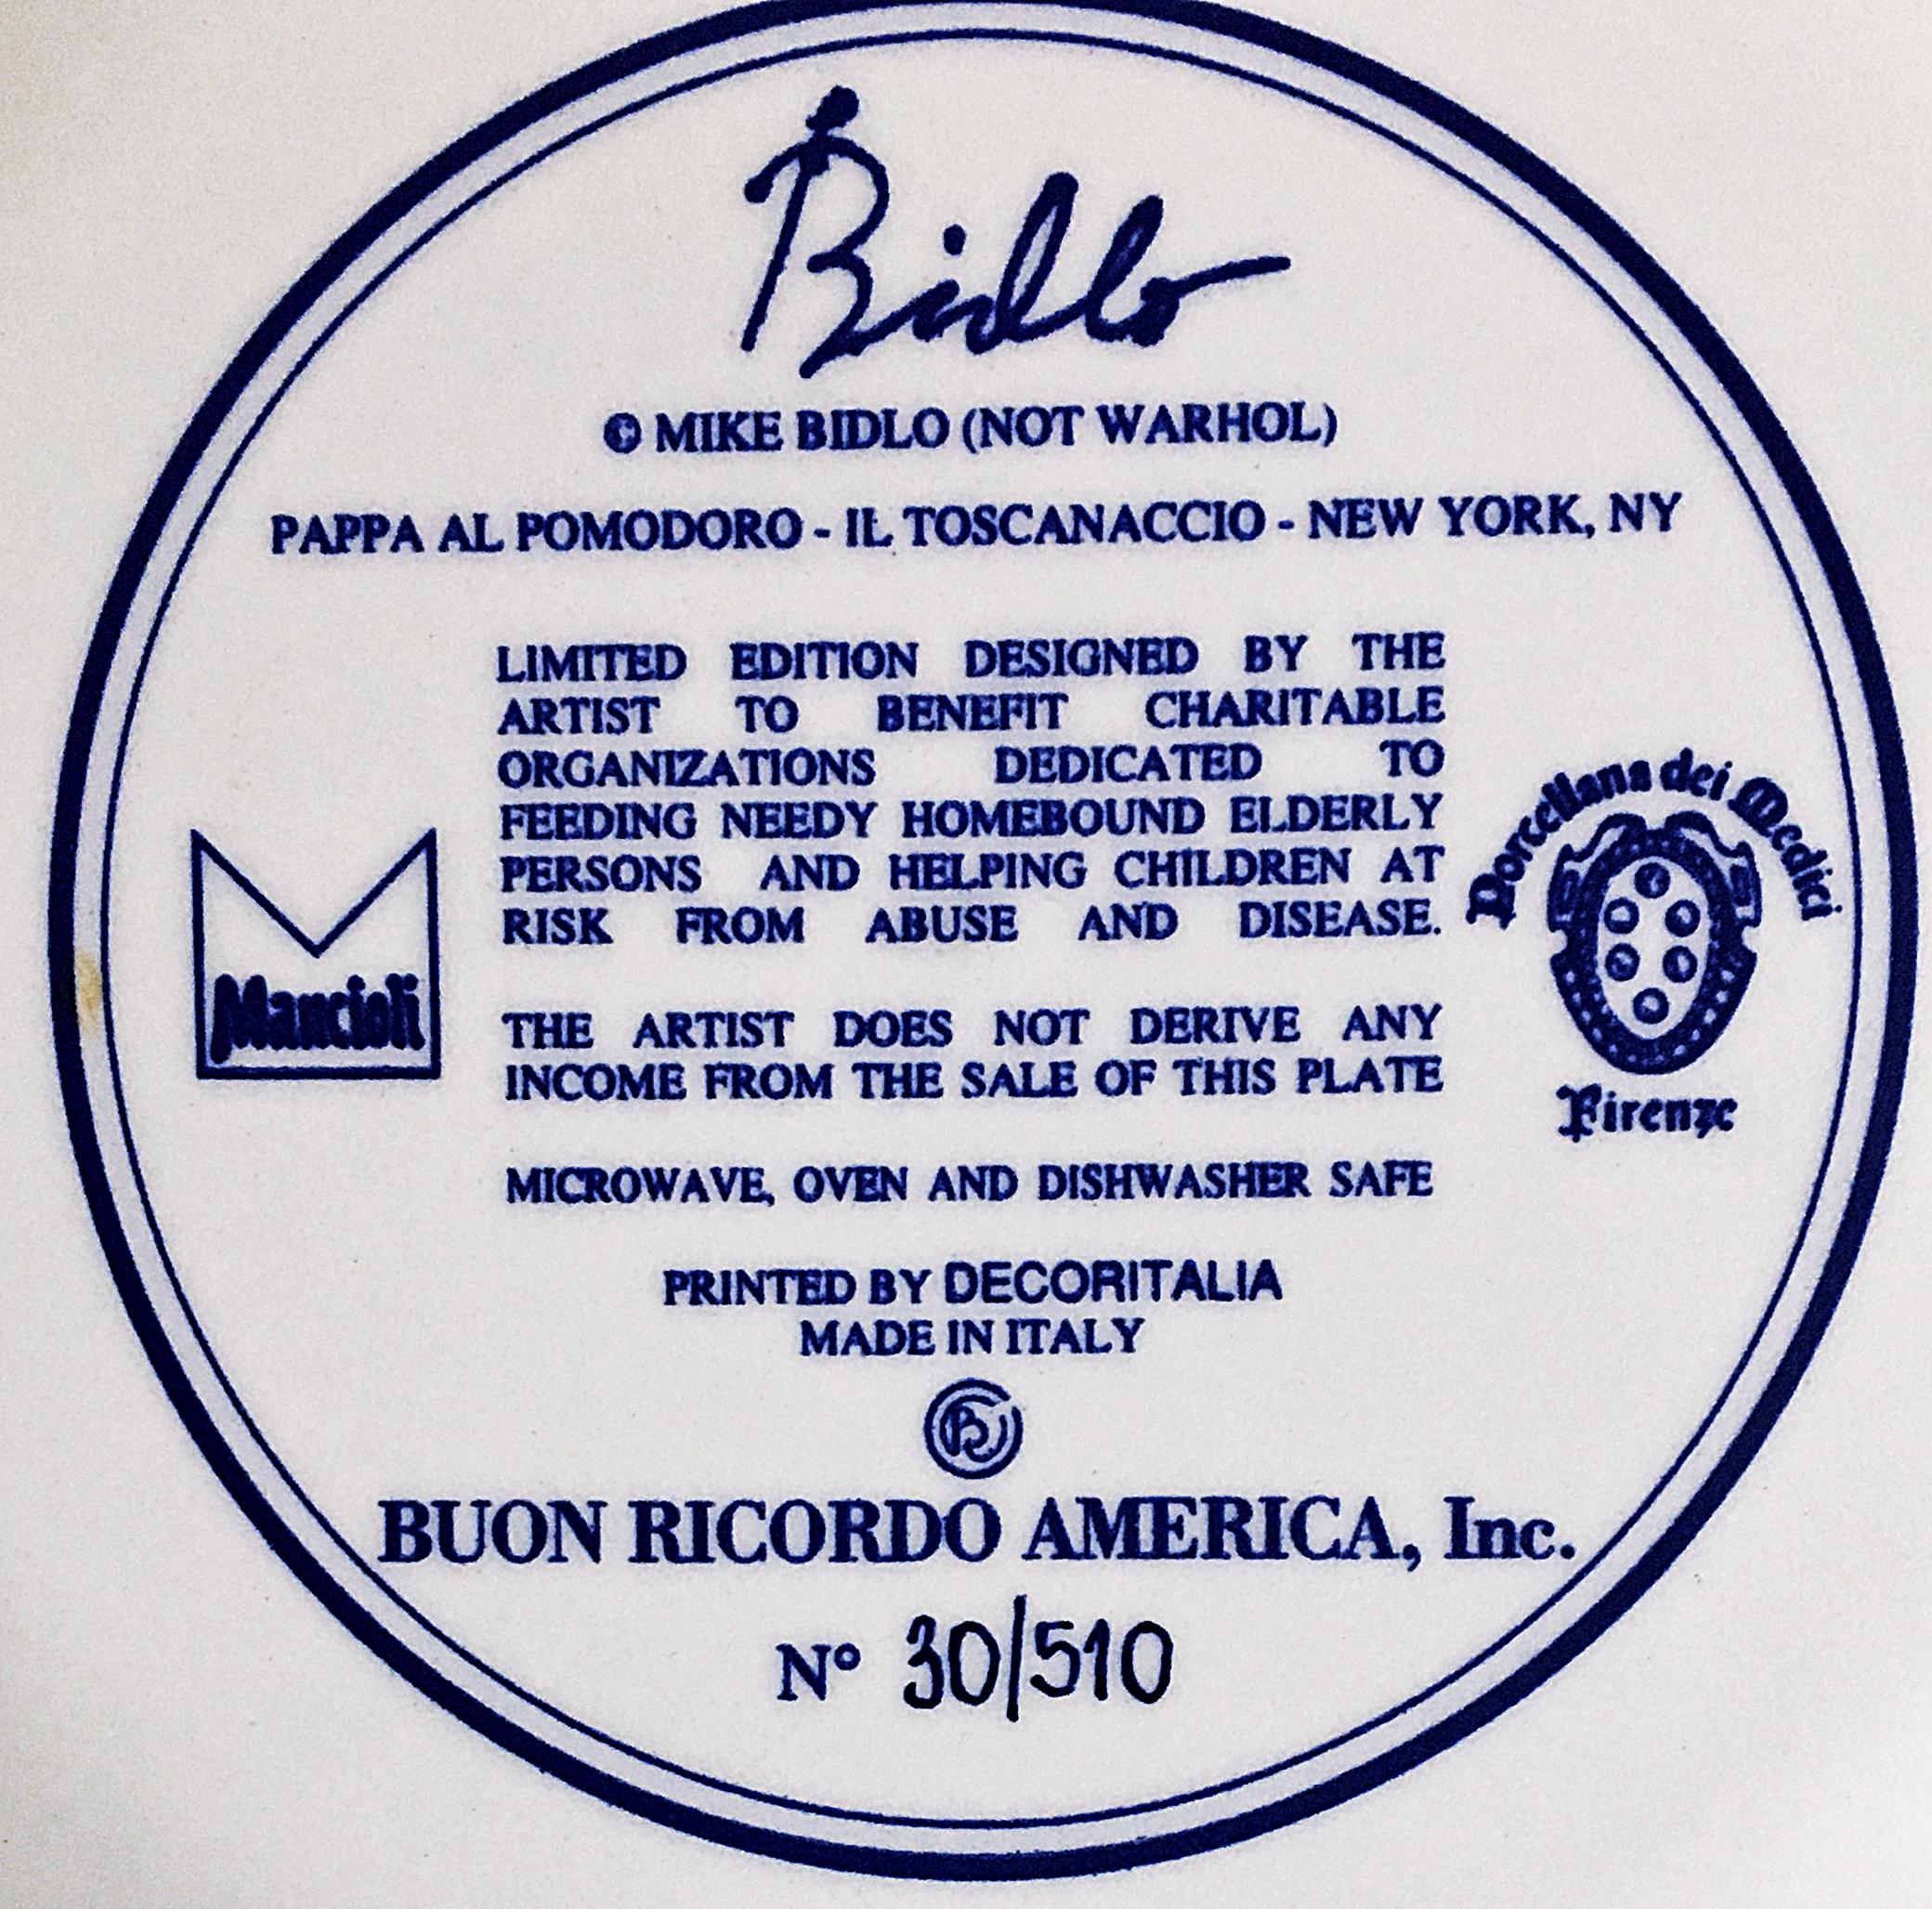 Mike Bidlo
Not Warhol (Pappa Al Pomodoro - Il Toscanaccio - NYC), 2000
Limited Edition Ceramic Plate. Artist Signature Fired into Plate.
Artist signature fired into the plate on the back and numbered 87 from the edition of only 510.
10 inches